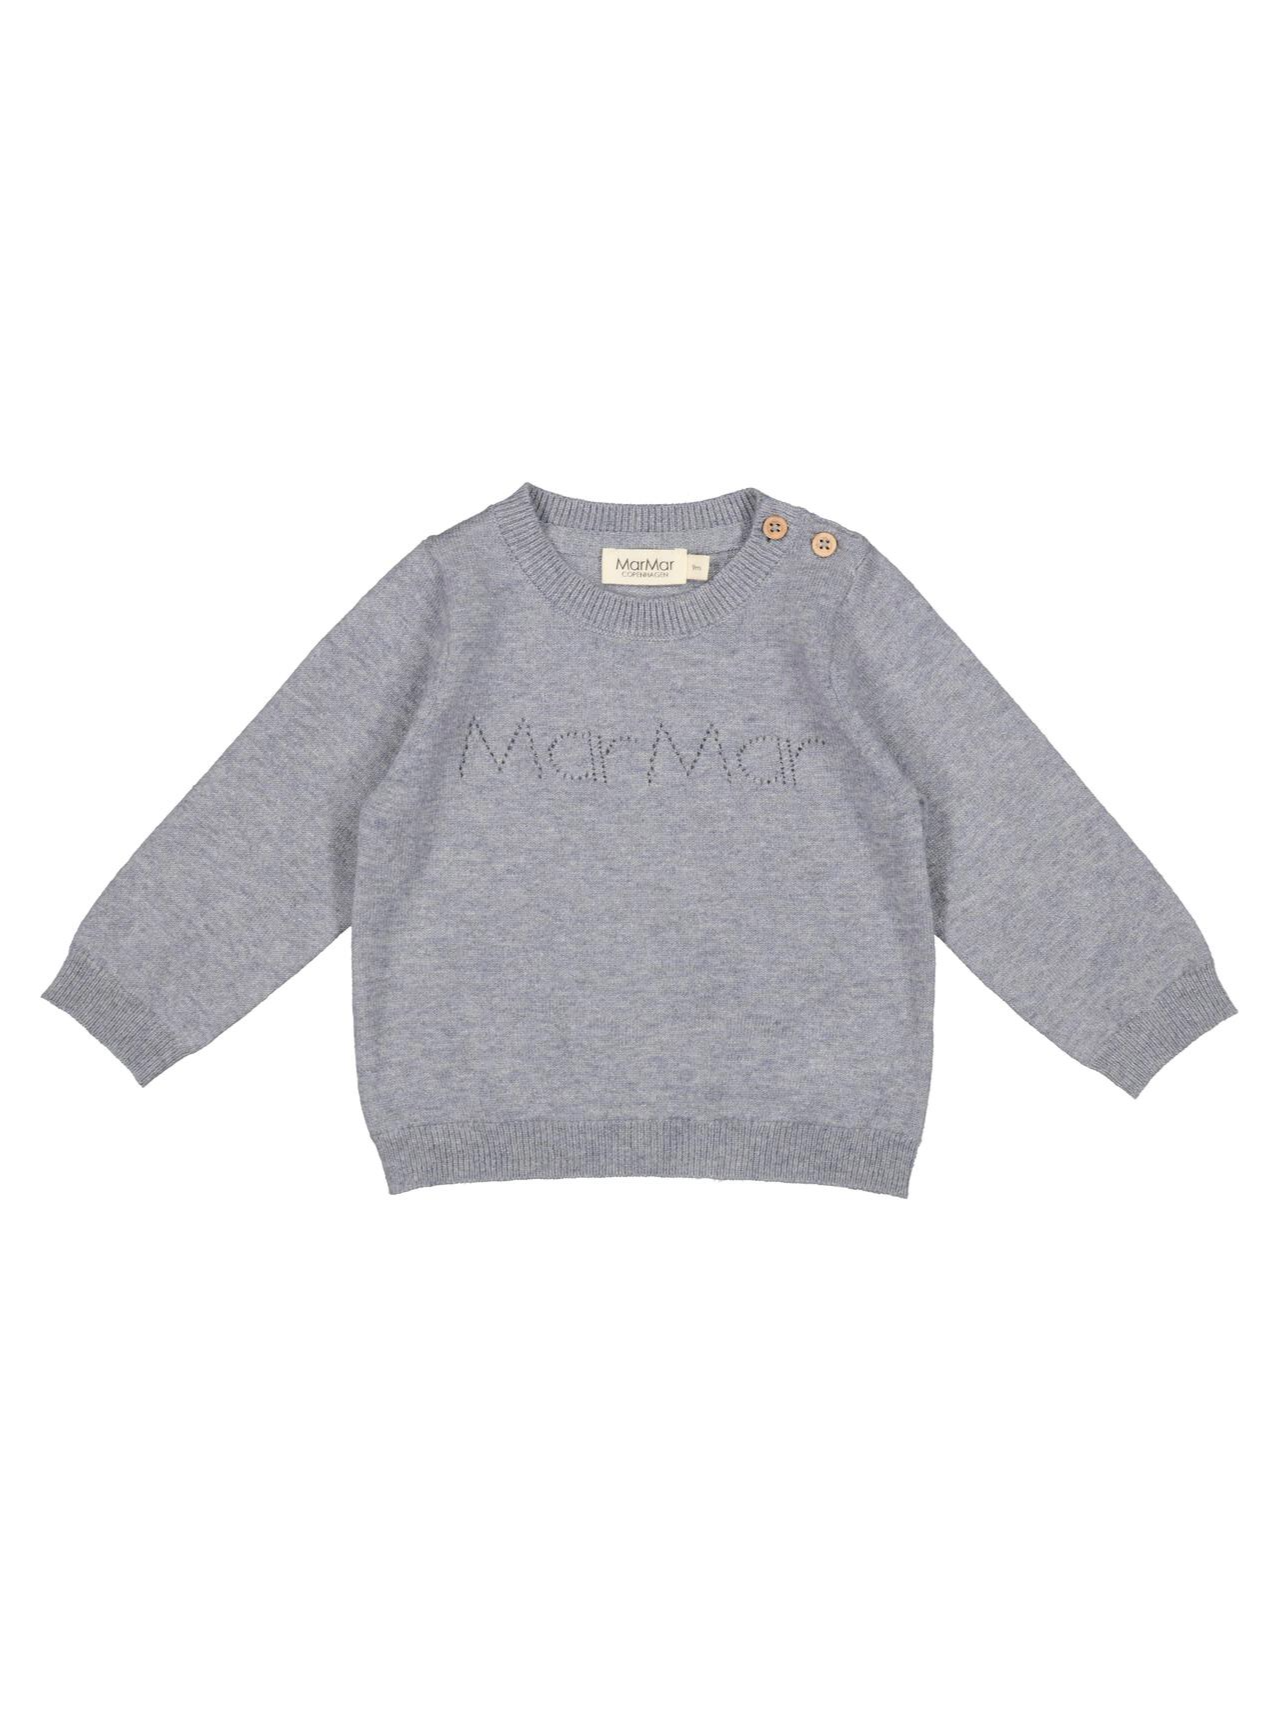 MarMar Tano B Sweater - Feather Blue (3Y Only)